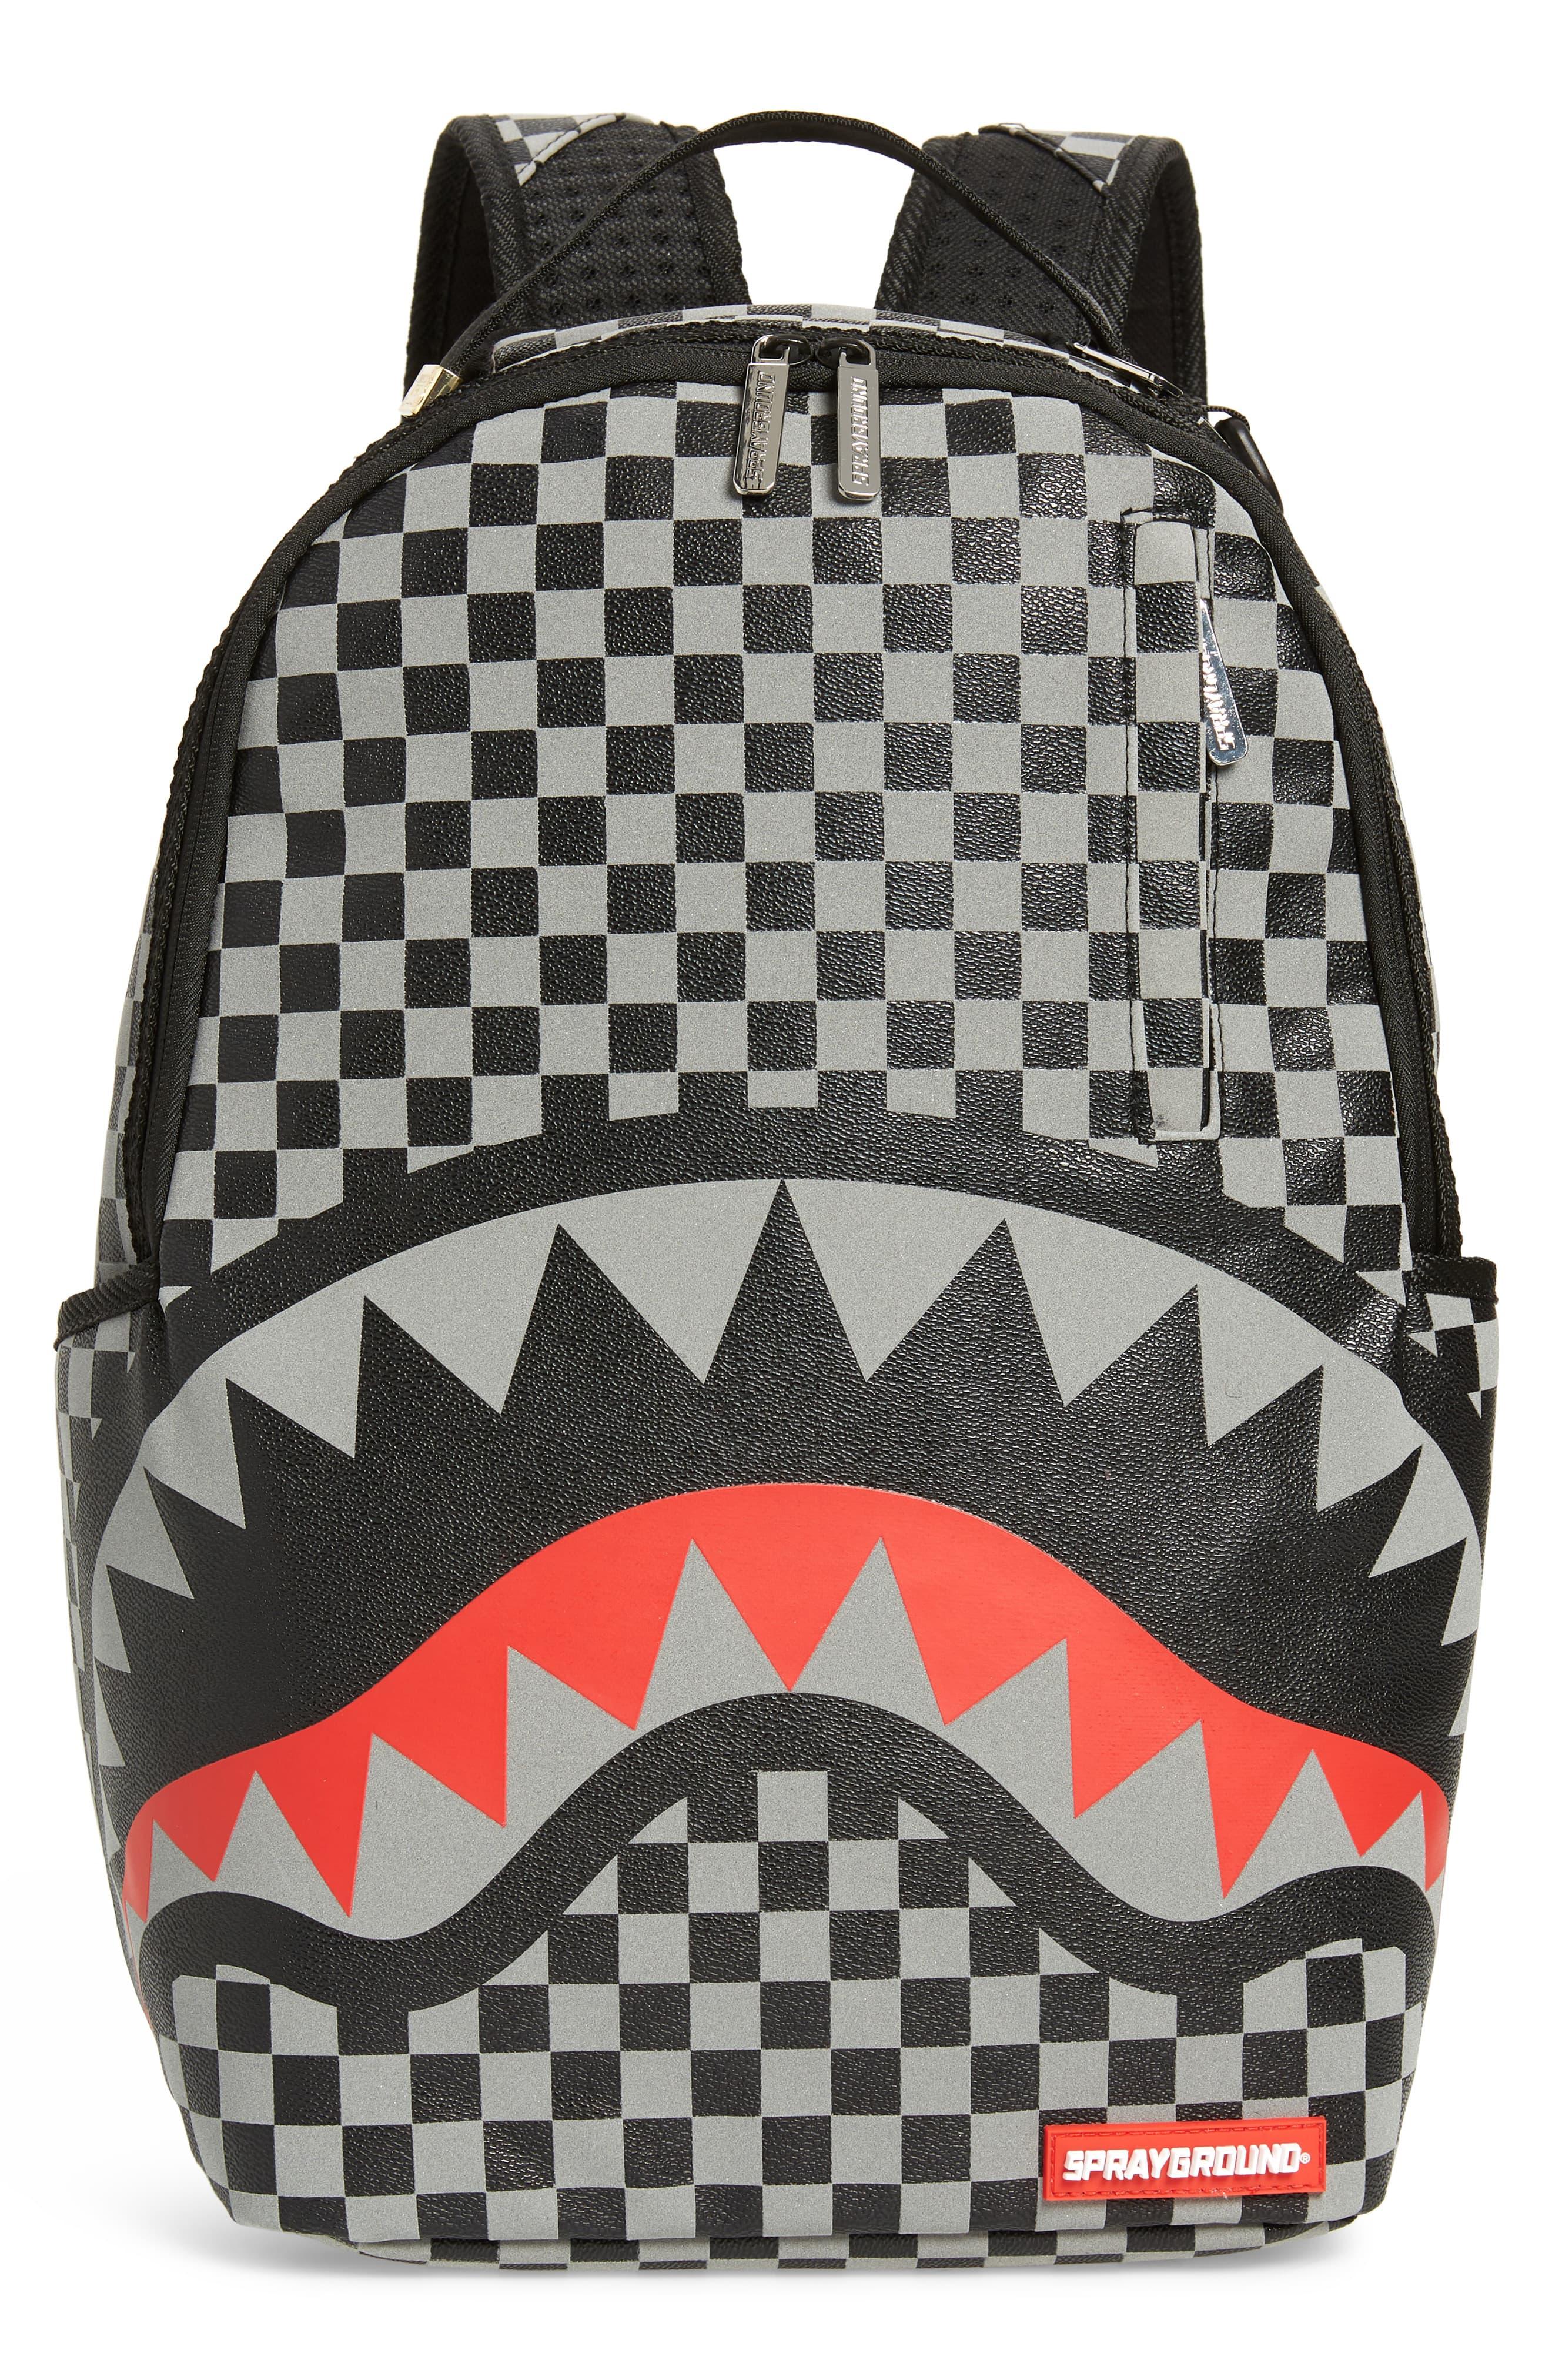 Sharks In Paris Backpack Camo Edition | English as a Second Language at